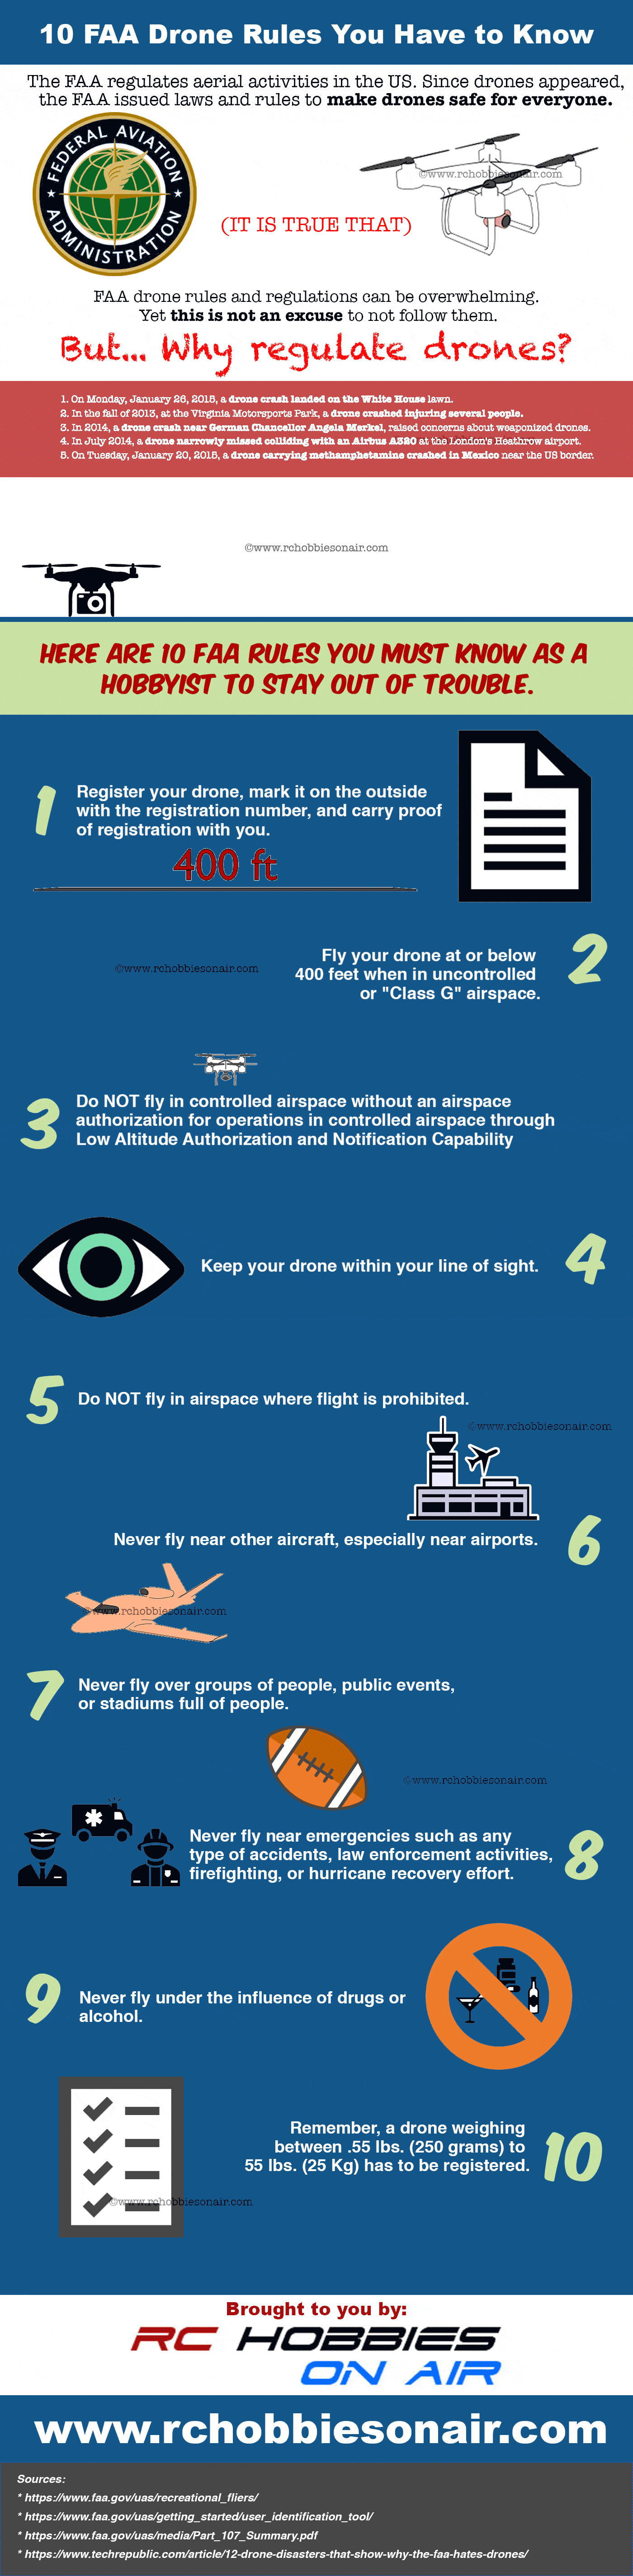 FAA Drones Rules and Regulations